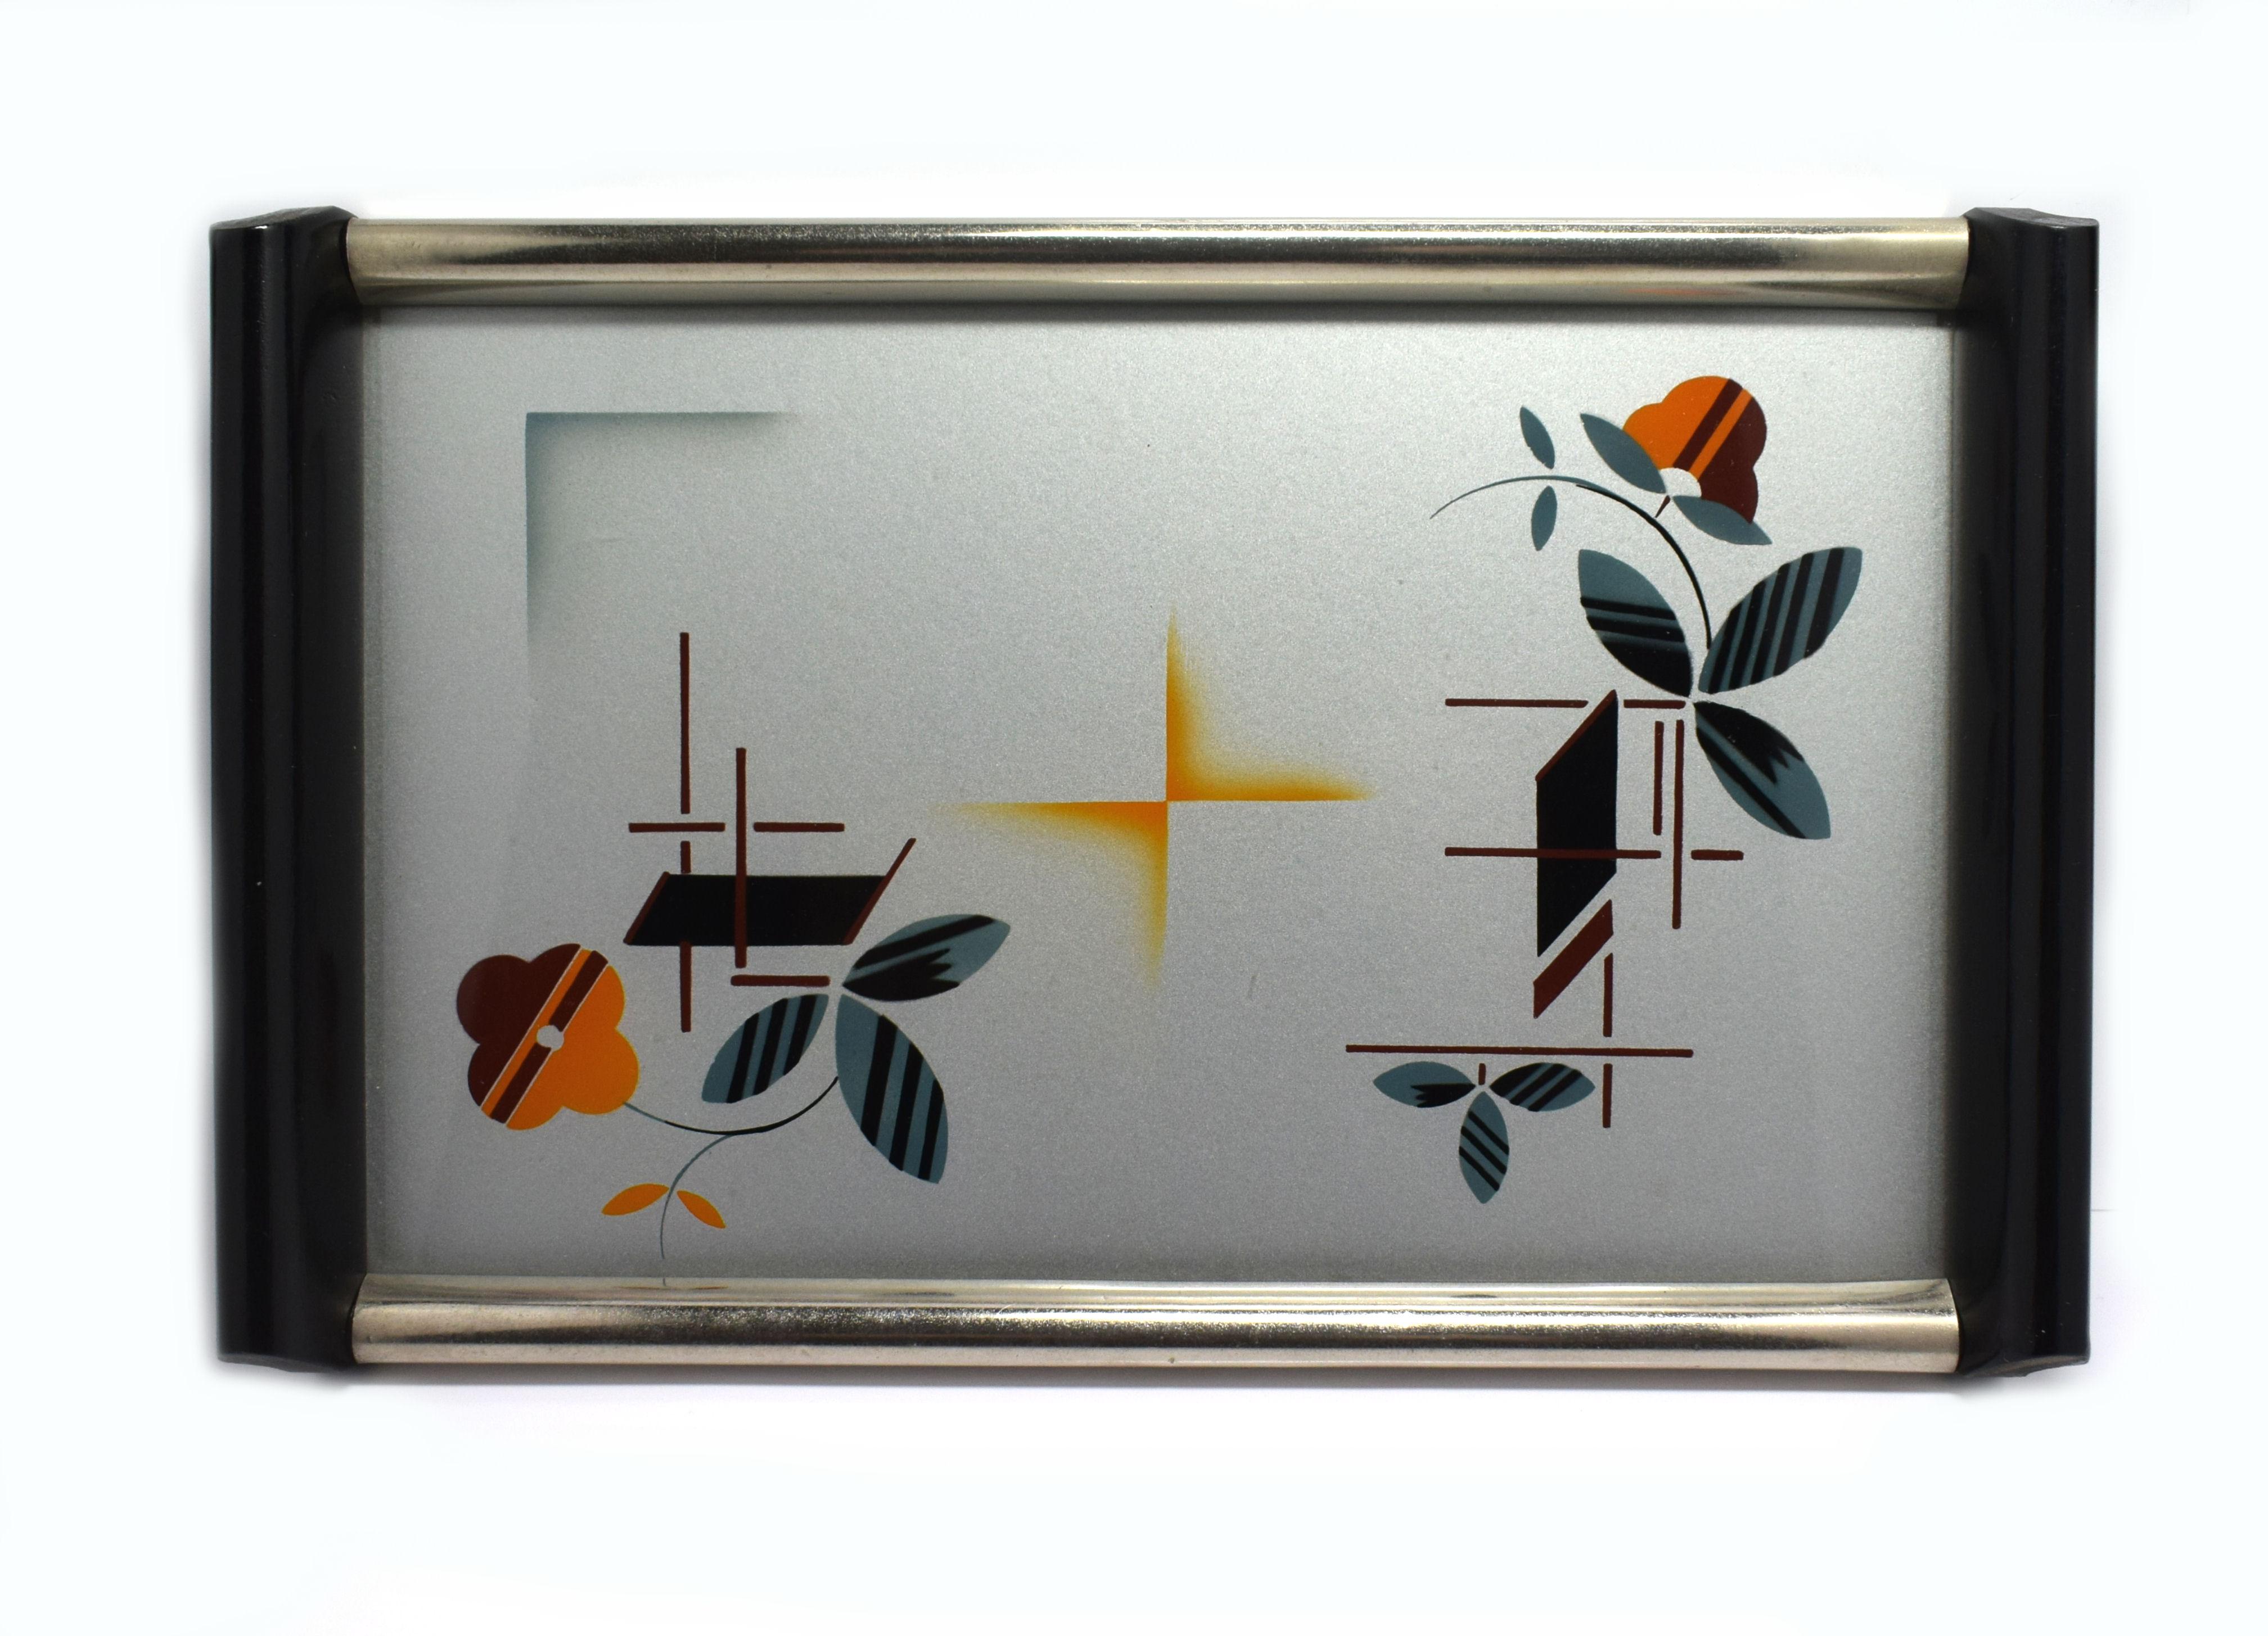 Original Art Deco cocktail tray with geometric and floral airbrushed pattern as you know it from the German Bauhaus. A real beautiful masterpiece, the geometric and floral design is reverse painted underneath the glass which is airbrushed in